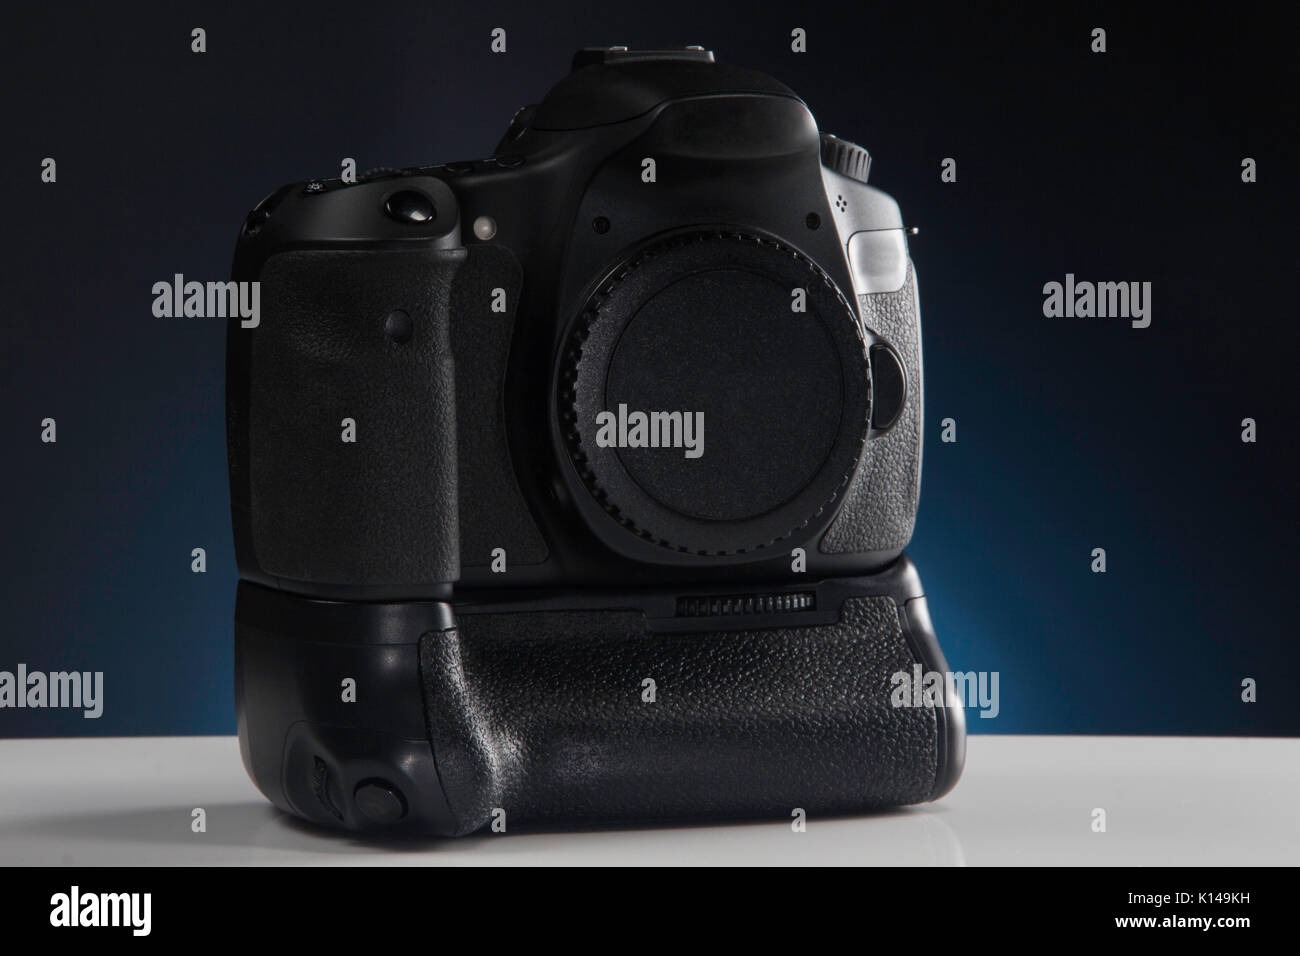 A Modern DSLR camera with Lens cap and battery grip attached Stock Photo